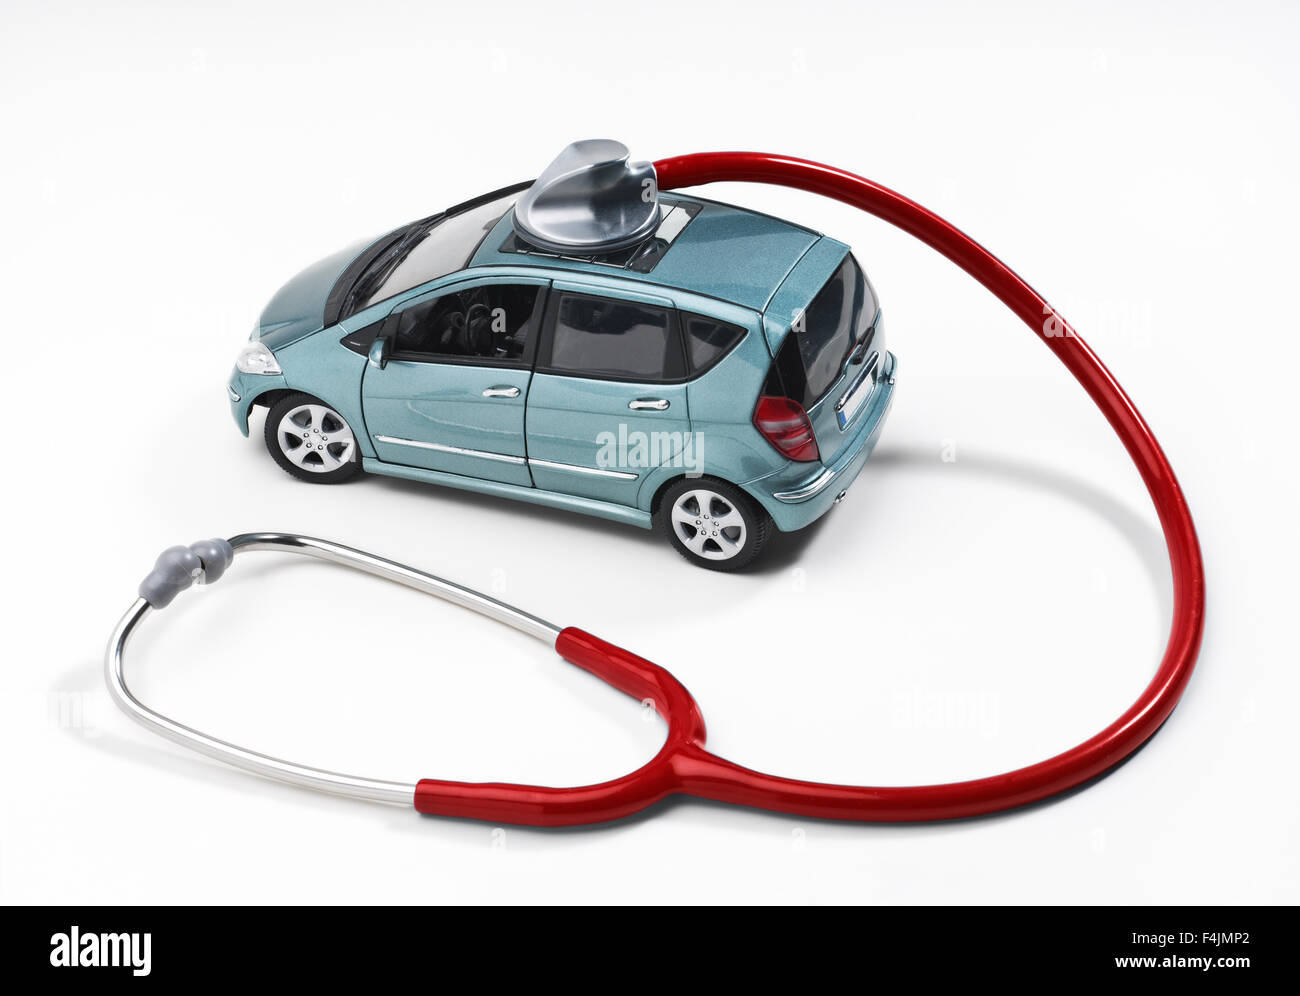 Car is monitored with a stethoscope. Stock Photo